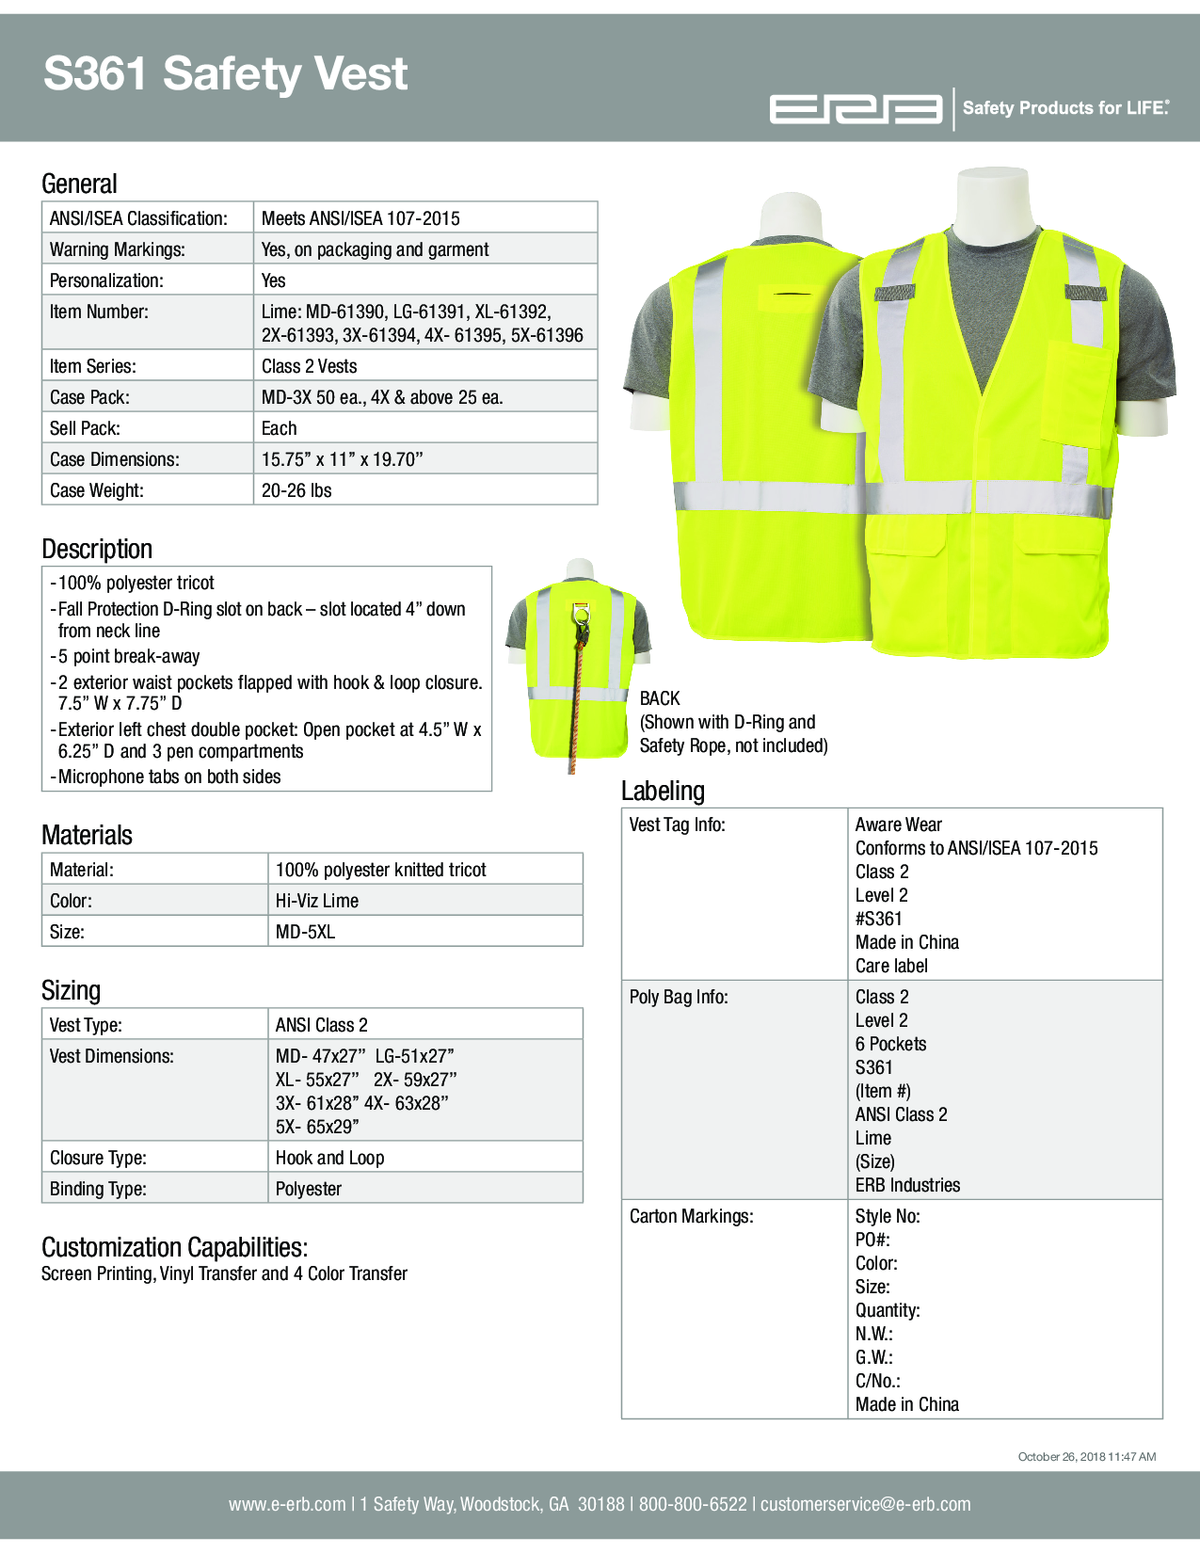 S361 Class 2 Five-Point Break-Away Safety Vest with D-Ring 1PC